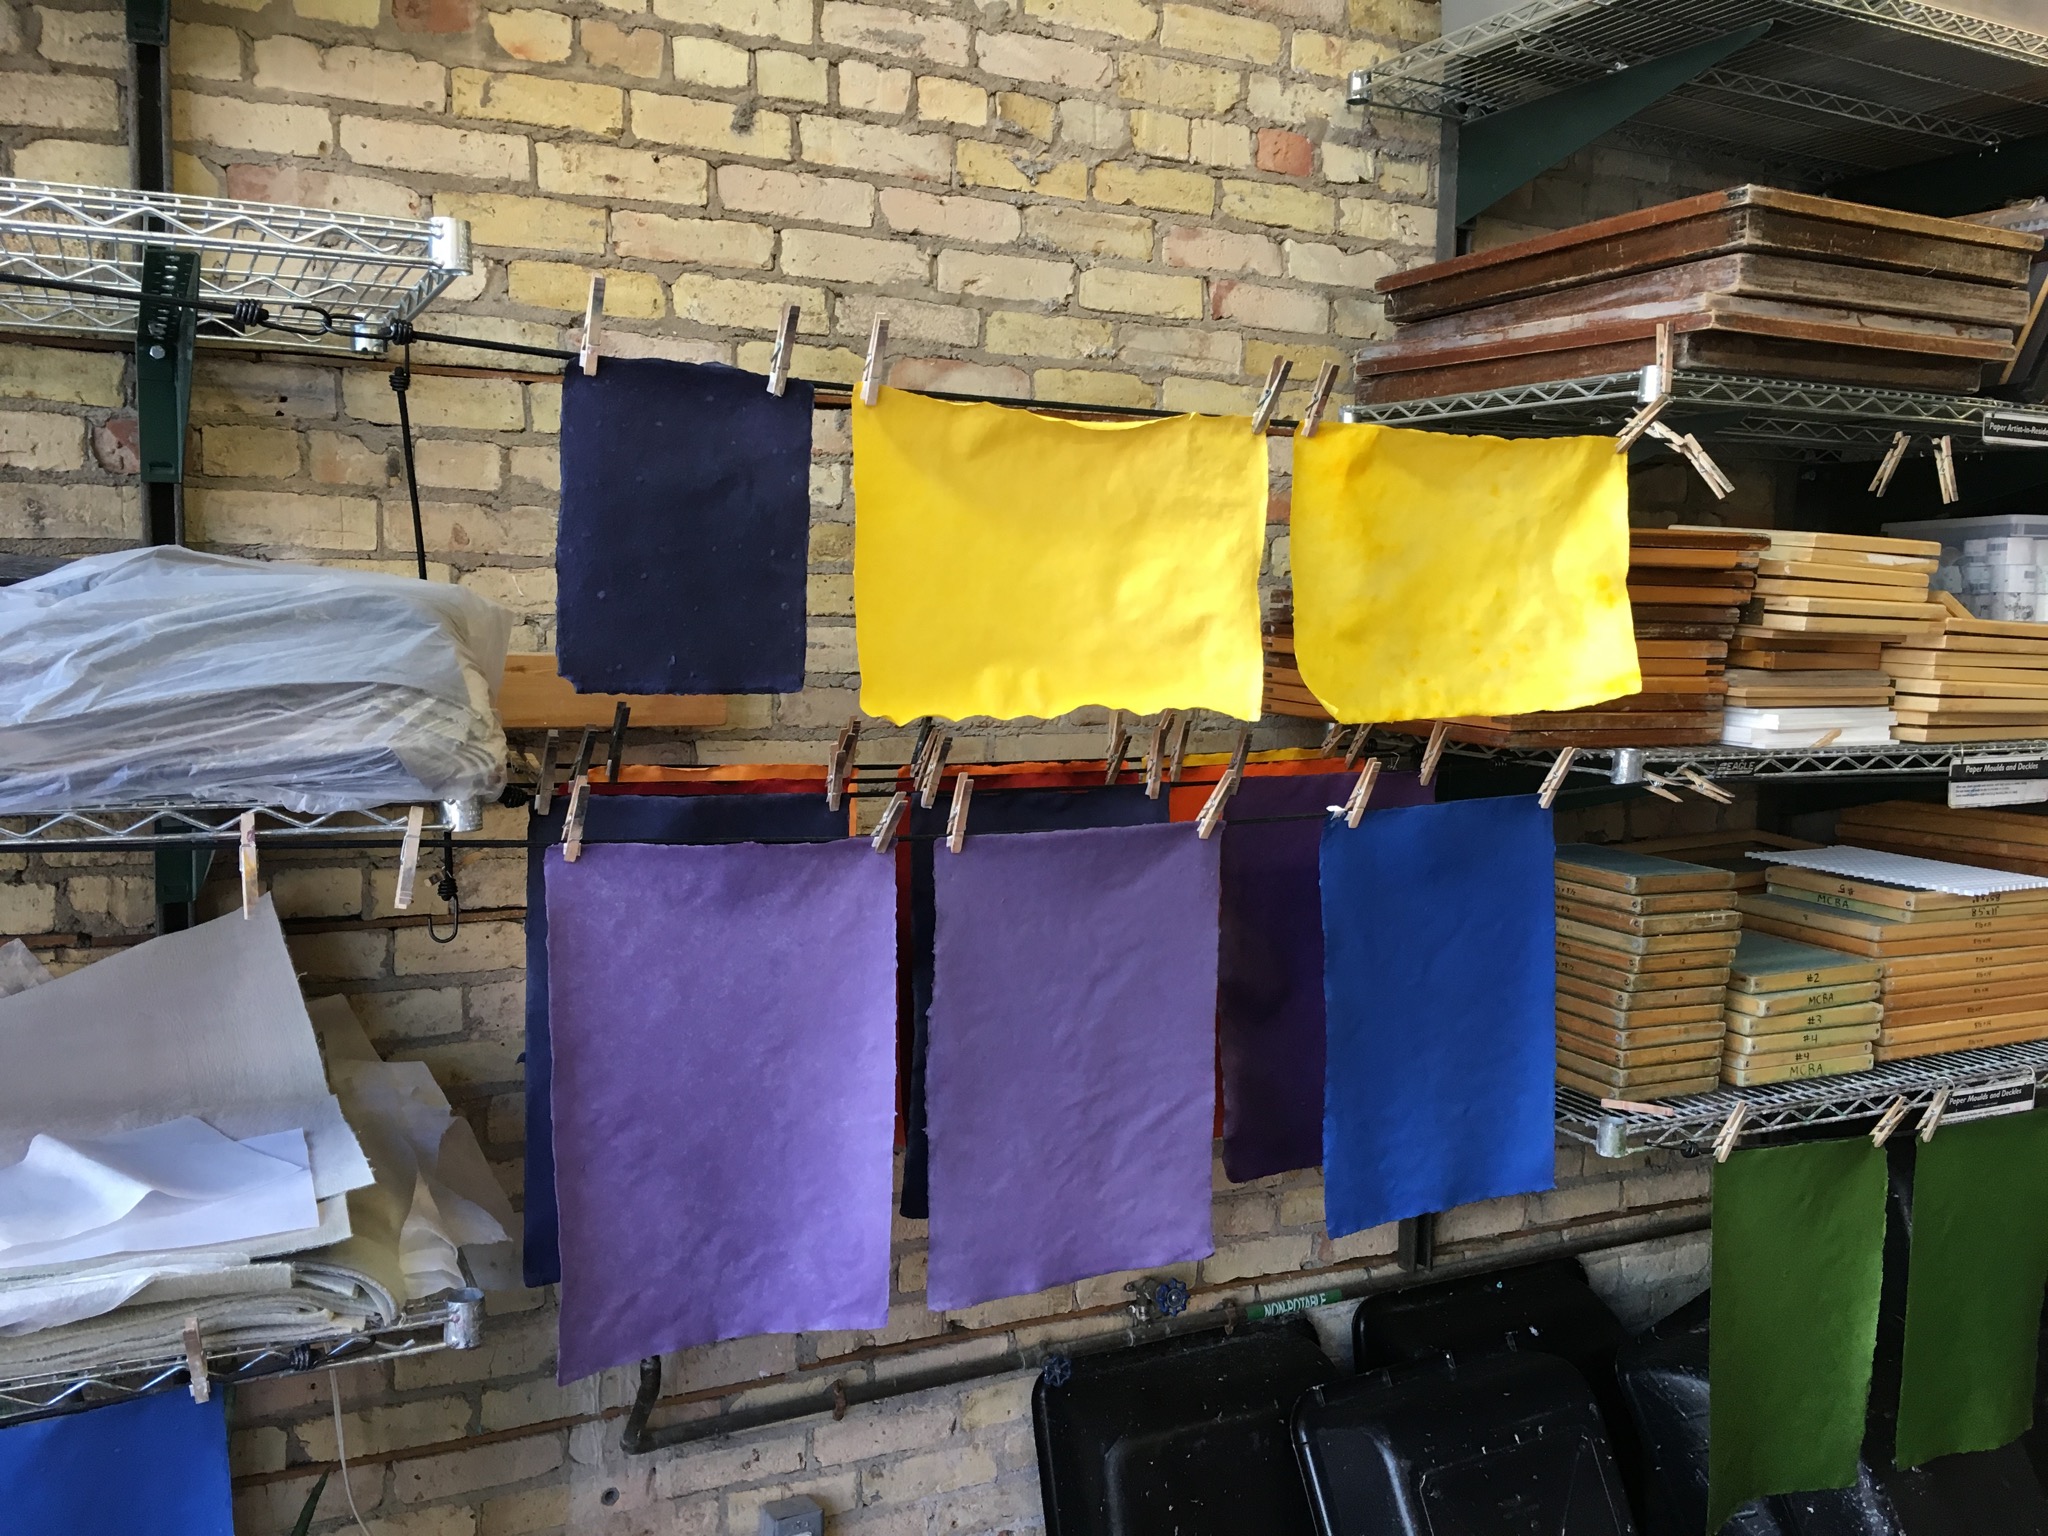 Handmade sheets of paper drying after the colouring process.